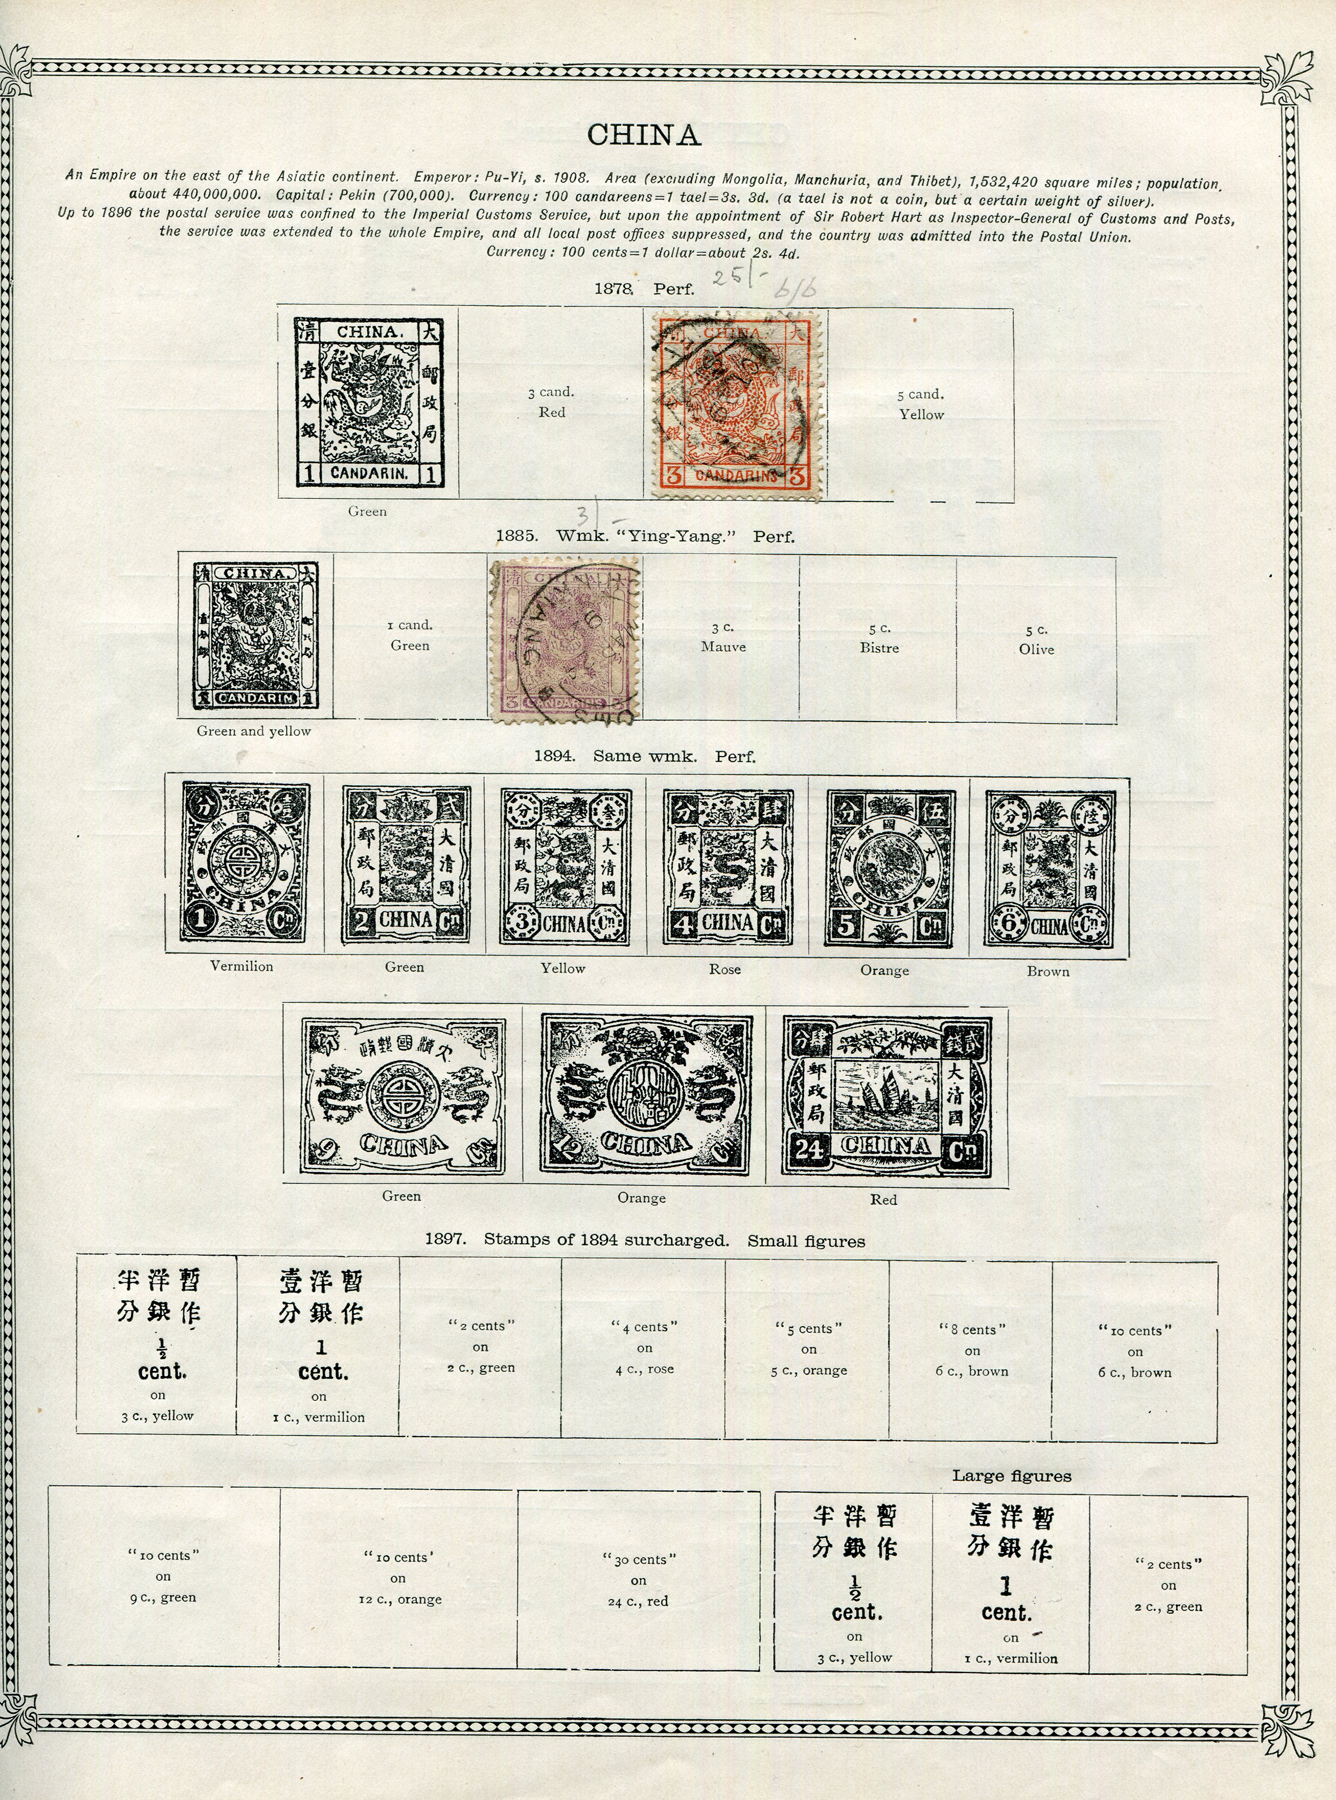 An Ideal stamp album containing world stamps, including China 1878 3 Candarins used, 1897 2c red